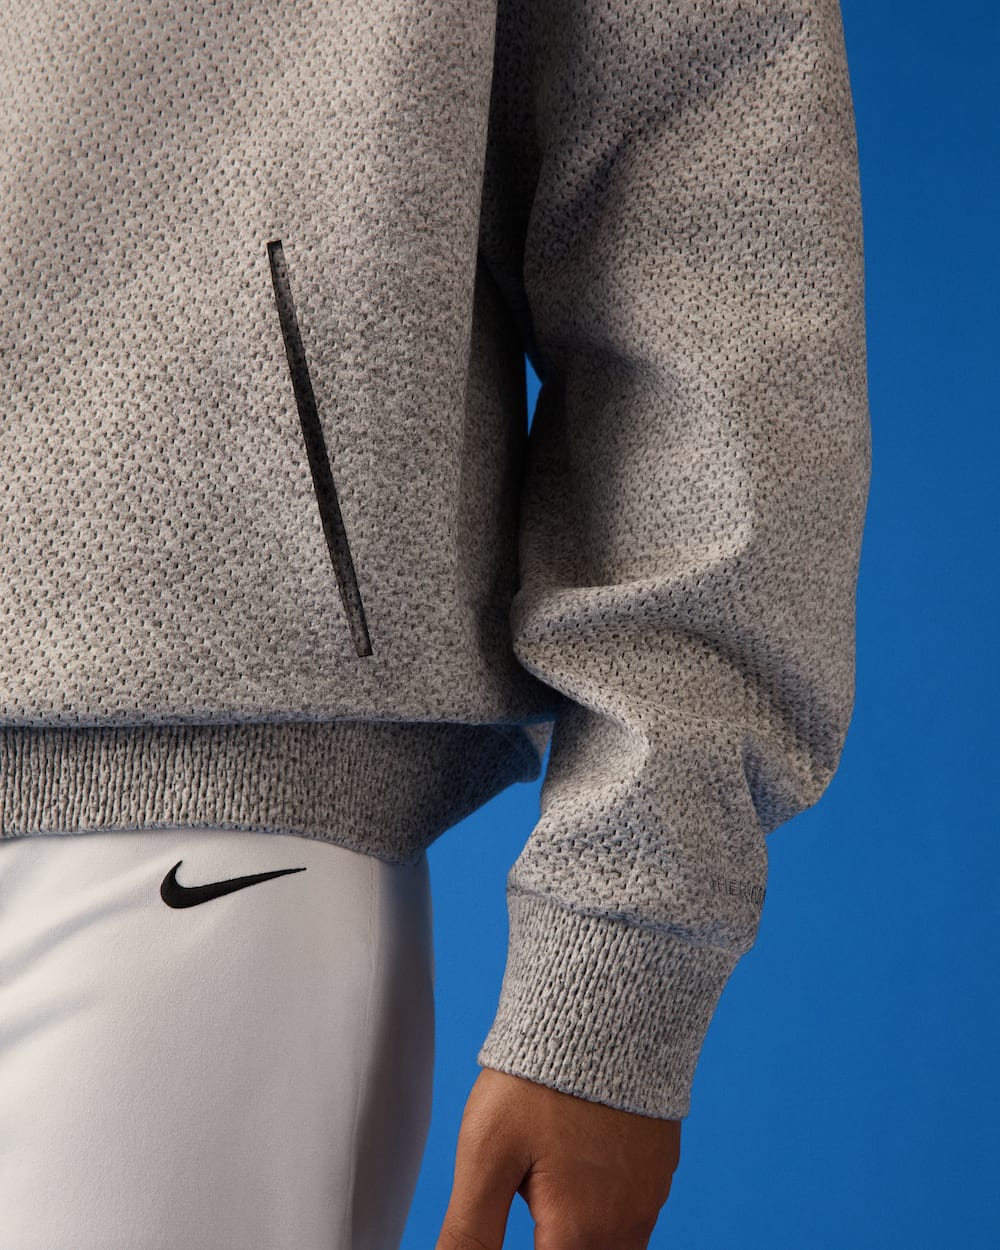 Nike Forward First Look Details